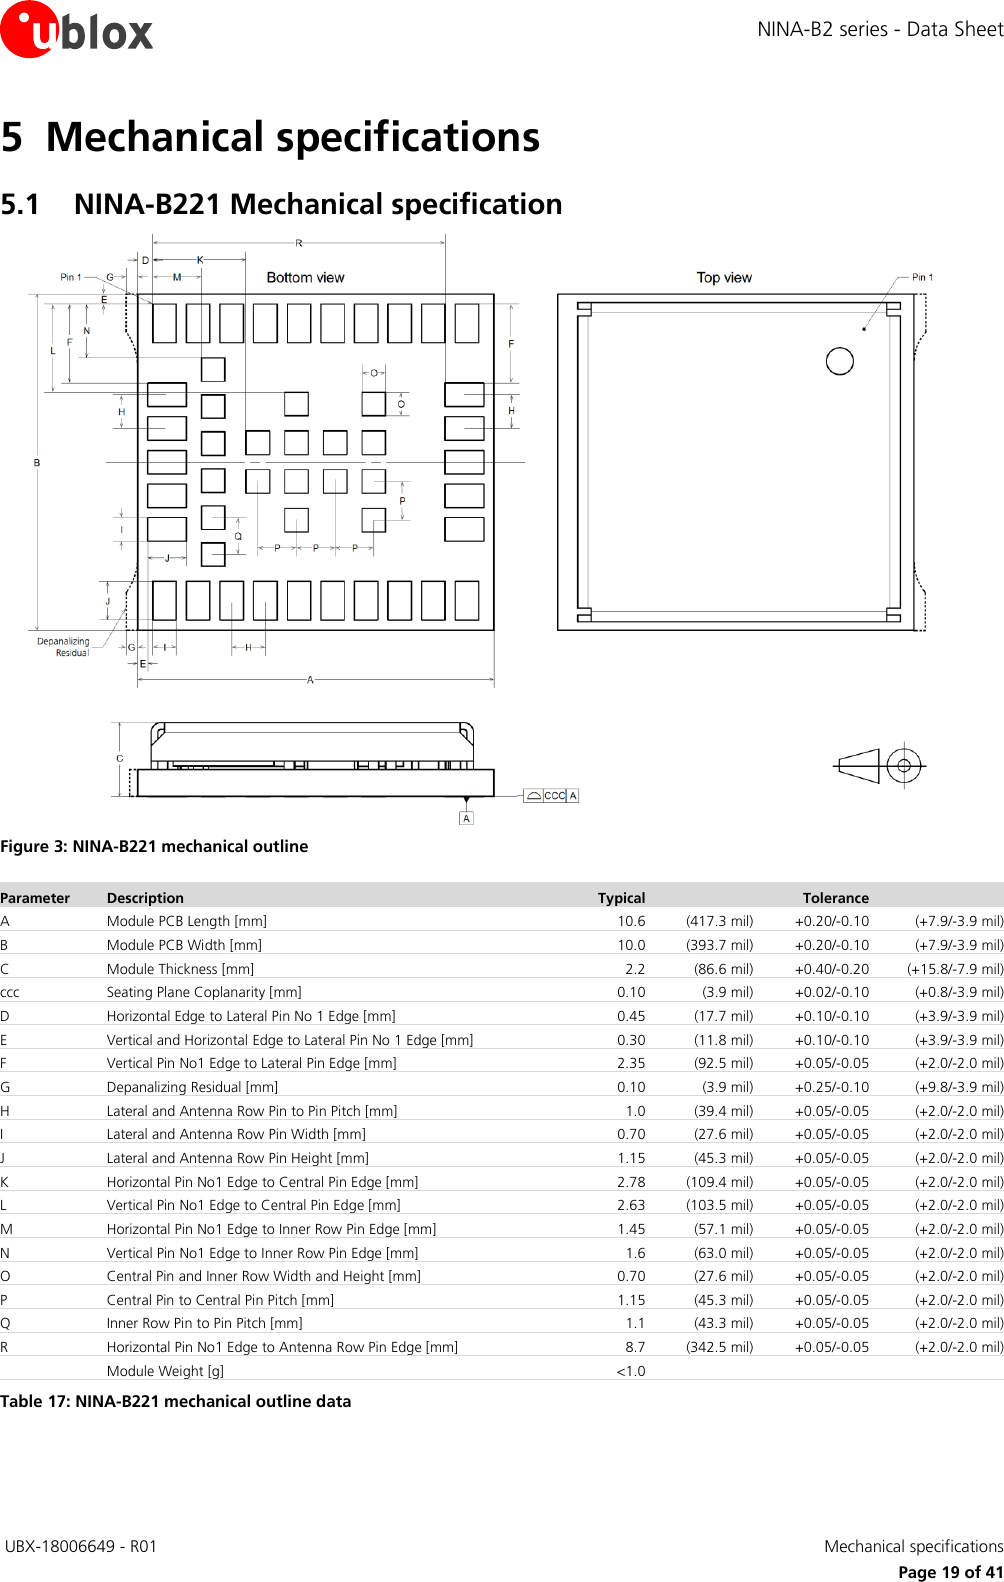 NINA-B2 series - Data Sheet  UBX-18006649 - R01   Mechanical specifications     Page 19 of 41 5 Mechanical specifications 5.1 NINA-B221 Mechanical specification  Figure 3: NINA-B221 mechanical outline Parameter Description Typical  Tolerance  A  Module PCB Length [mm] 10.6 (417.3 mil) +0.20/-0.10 (+7.9/-3.9 mil) B Module PCB Width [mm] 10.0 (393.7 mil) +0.20/-0.10 (+7.9/-3.9 mil) C Module Thickness [mm] 2.2 (86.6 mil) +0.40/-0.20 (+15.8/-7.9 mil) ccc Seating Plane Coplanarity [mm] 0.10 (3.9 mil) +0.02/-0.10 (+0.8/-3.9 mil) D Horizontal Edge to Lateral Pin No 1 Edge [mm] 0.45 (17.7 mil) +0.10/-0.10 (+3.9/-3.9 mil) E Vertical and Horizontal Edge to Lateral Pin No 1 Edge [mm] 0.30 (11.8 mil) +0.10/-0.10 (+3.9/-3.9 mil) F Vertical Pin No1 Edge to Lateral Pin Edge [mm] 2.35 (92.5 mil) +0.05/-0.05 (+2.0/-2.0 mil) G Depanalizing Residual [mm] 0.10 (3.9 mil) +0.25/-0.10 (+9.8/-3.9 mil) H Lateral and Antenna Row Pin to Pin Pitch [mm] 1.0 (39.4 mil) +0.05/-0.05 (+2.0/-2.0 mil) I Lateral and Antenna Row Pin Width [mm] 0.70 (27.6 mil) +0.05/-0.05 (+2.0/-2.0 mil) J Lateral and Antenna Row Pin Height [mm] 1.15 (45.3 mil) +0.05/-0.05 (+2.0/-2.0 mil) K Horizontal Pin No1 Edge to Central Pin Edge [mm] 2.78 (109.4 mil) +0.05/-0.05 (+2.0/-2.0 mil) L Vertical Pin No1 Edge to Central Pin Edge [mm] 2.63 (103.5 mil) +0.05/-0.05 (+2.0/-2.0 mil) M Horizontal Pin No1 Edge to Inner Row Pin Edge [mm] 1.45 (57.1 mil) +0.05/-0.05 (+2.0/-2.0 mil) N Vertical Pin No1 Edge to Inner Row Pin Edge [mm] 1.6 (63.0 mil) +0.05/-0.05 (+2.0/-2.0 mil) O Central Pin and Inner Row Width and Height [mm] 0.70 (27.6 mil) +0.05/-0.05 (+2.0/-2.0 mil) P Central Pin to Central Pin Pitch [mm] 1.15 (45.3 mil) +0.05/-0.05 (+2.0/-2.0 mil) Q Inner Row Pin to Pin Pitch [mm] 1.1 (43.3 mil) +0.05/-0.05 (+2.0/-2.0 mil) R Horizontal Pin No1 Edge to Antenna Row Pin Edge [mm] 8.7 (342.5 mil) +0.05/-0.05 (+2.0/-2.0 mil)  Module Weight [g] &lt;1.0    Table 17: NINA-B221 mechanical outline data 